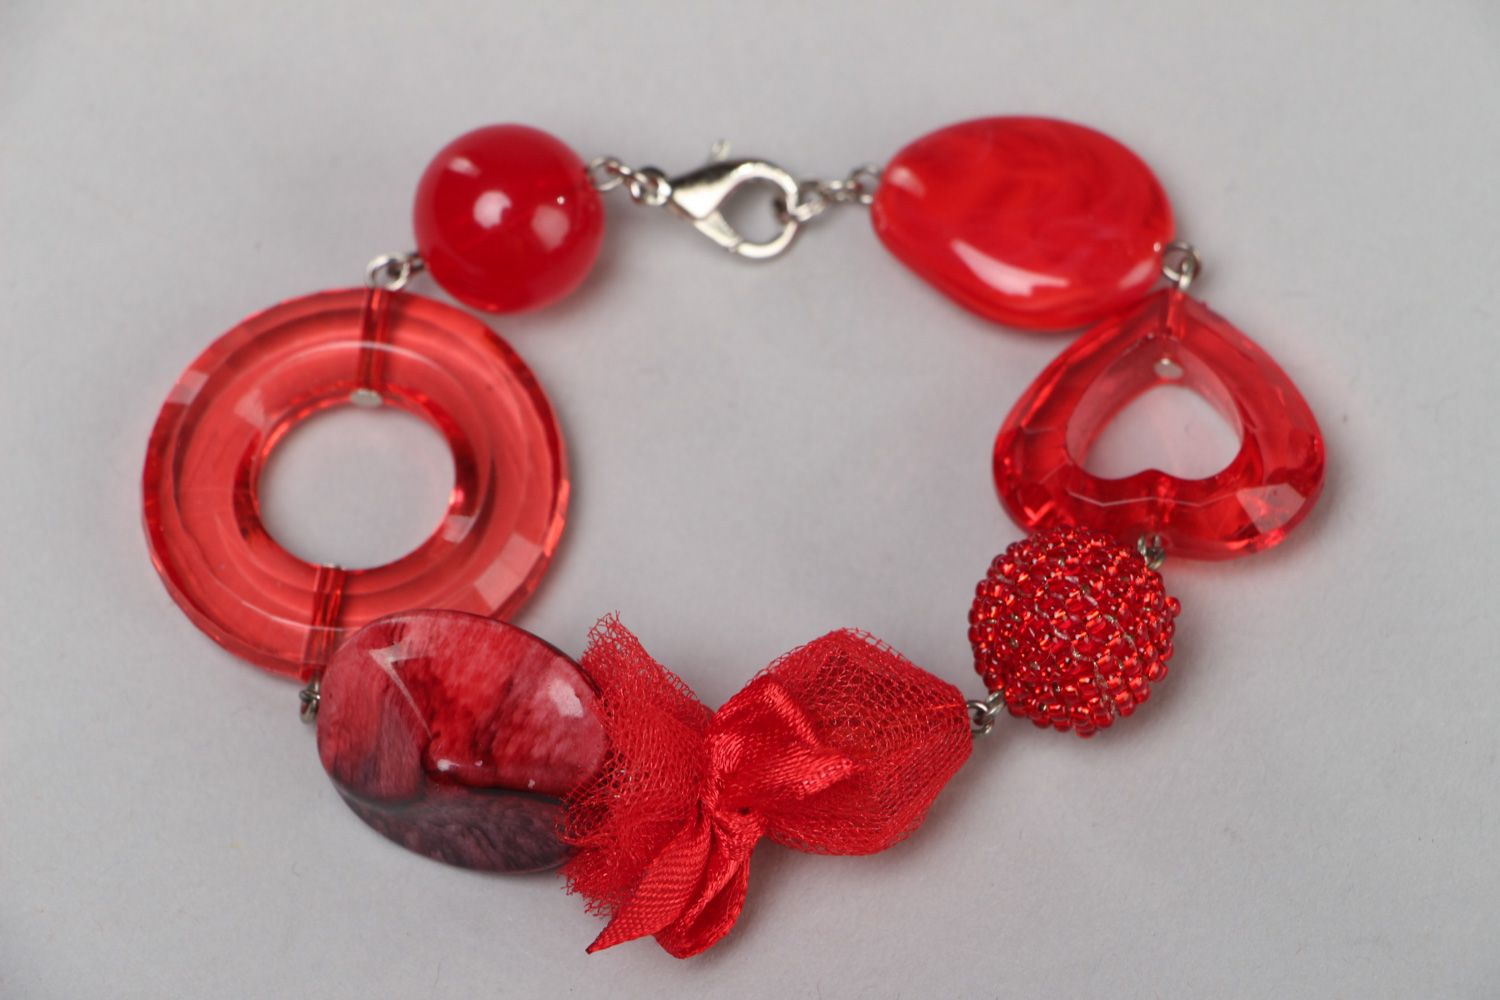 Handmade bright red wrist bracelet with plastic beads and metal fastener photo 1